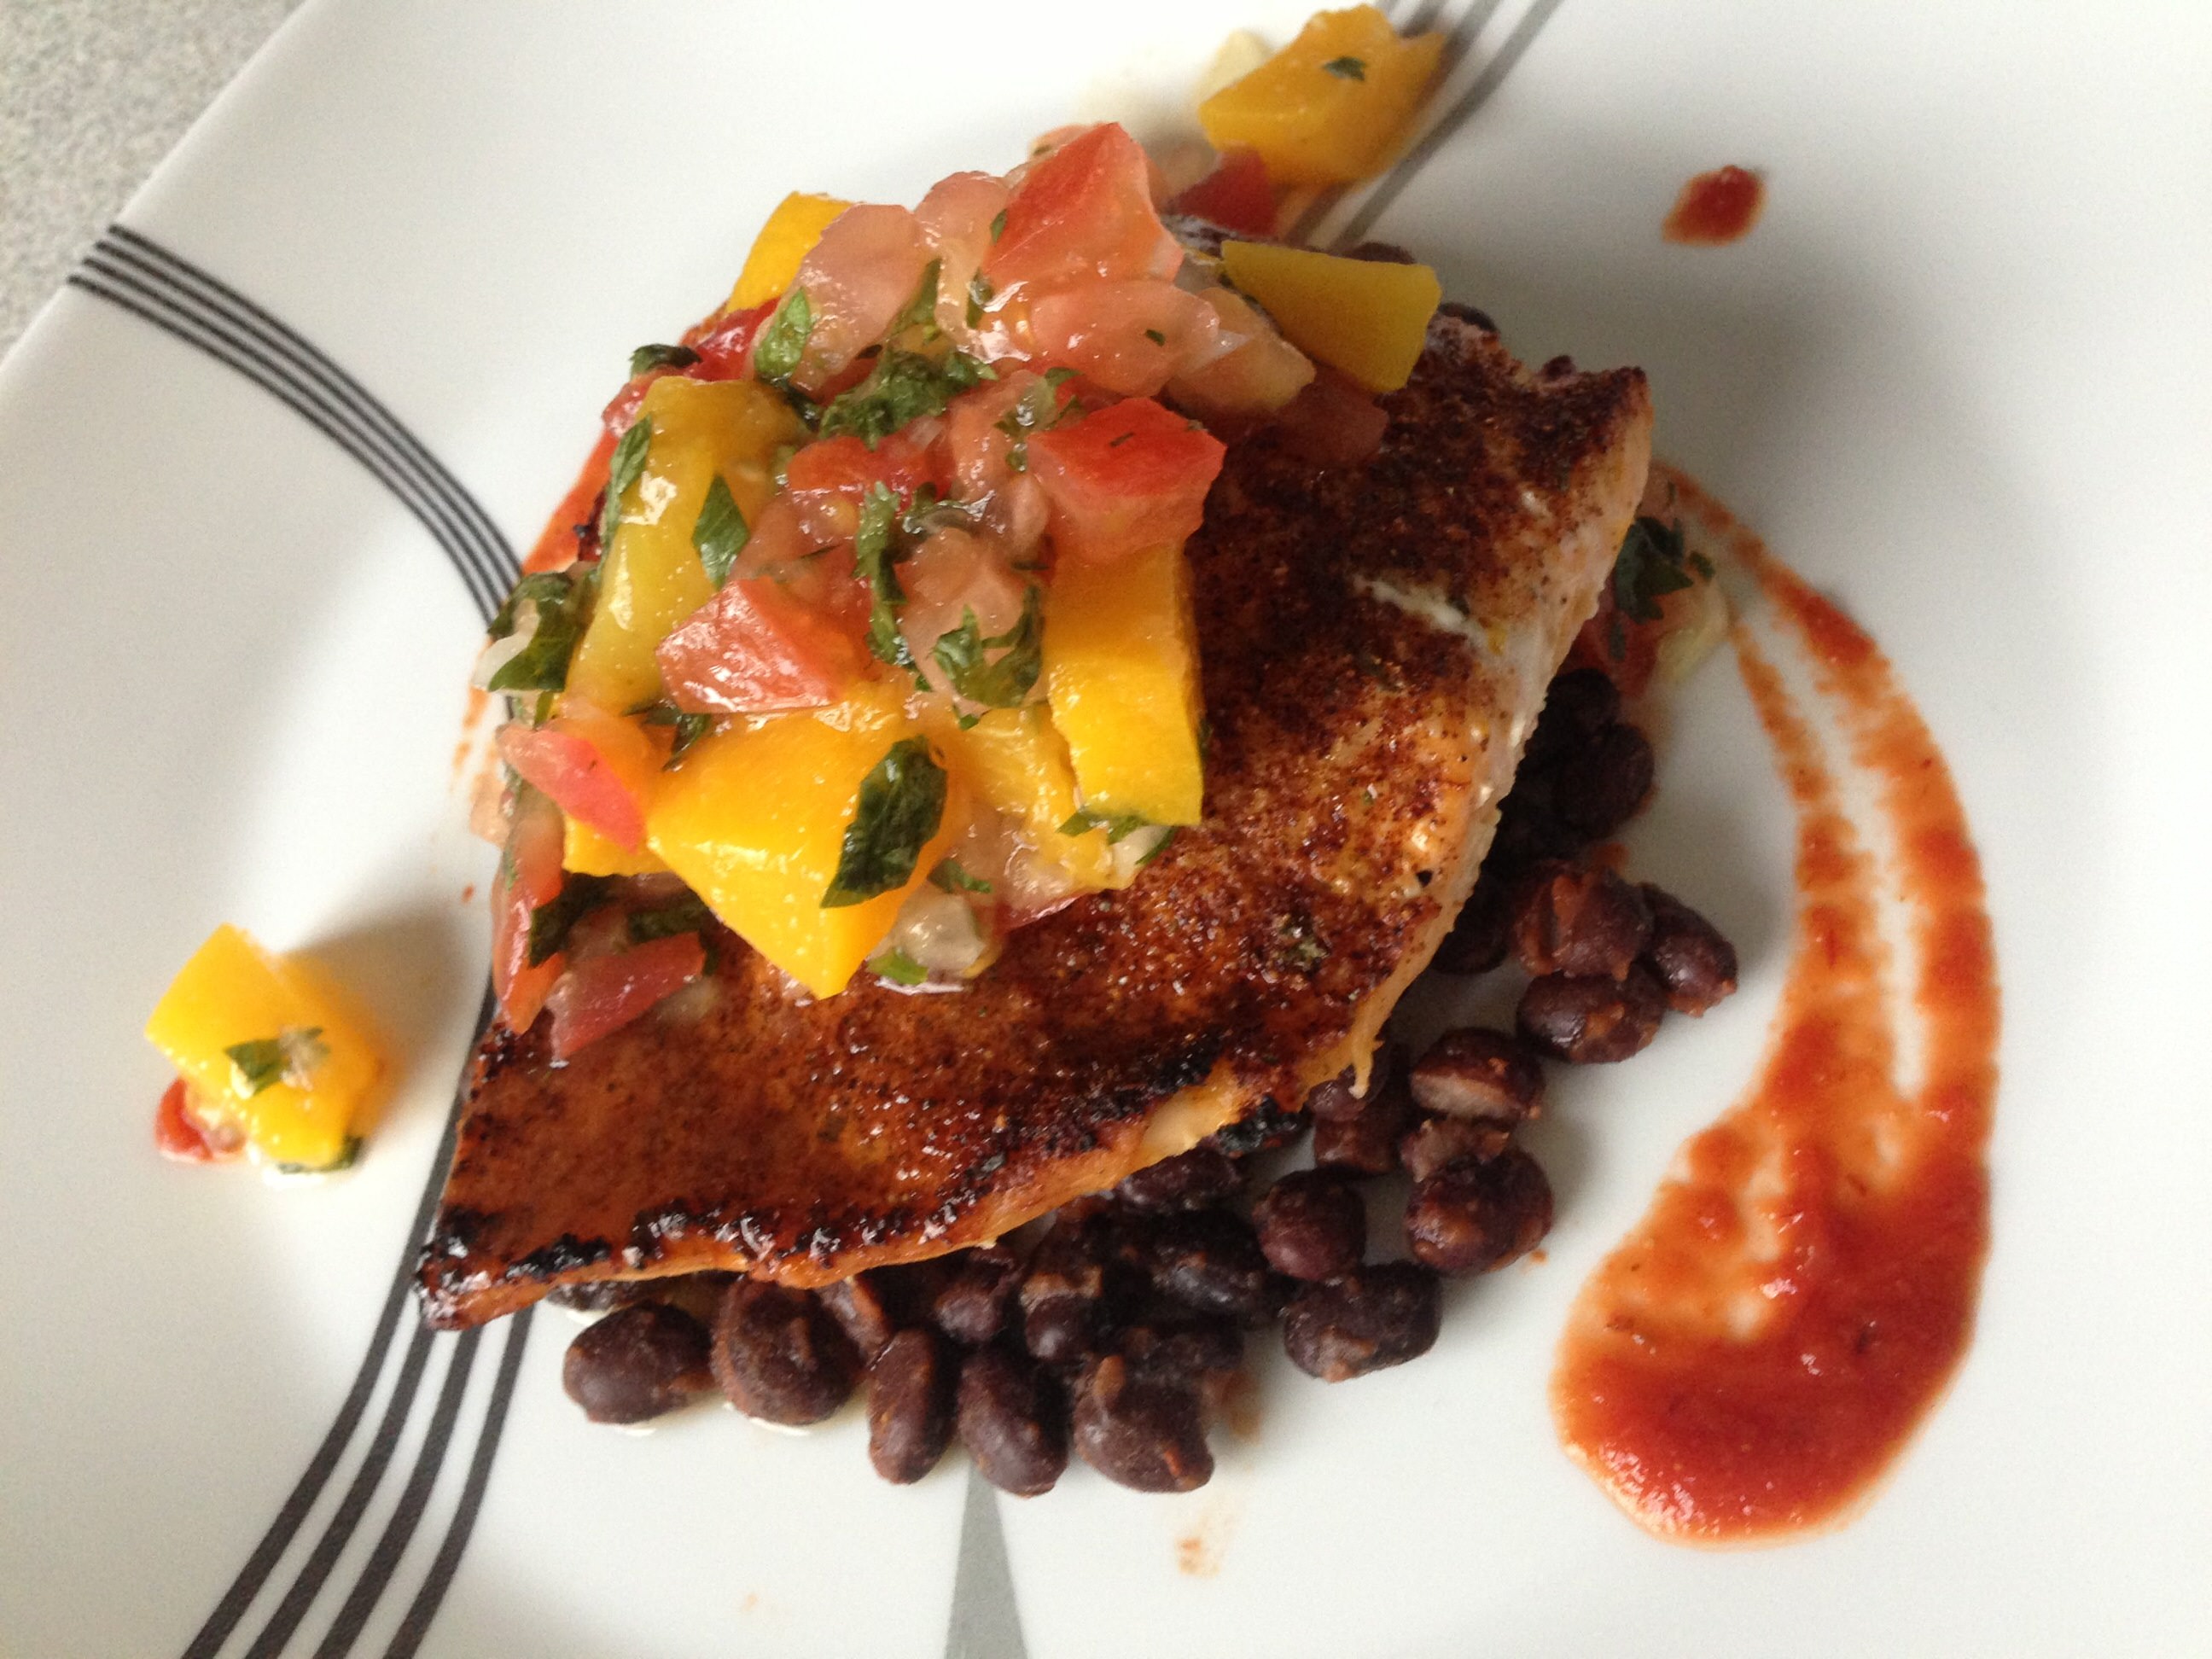 Chipotle Salmon with Peach Pico de Gallo and Roasted Black Beans